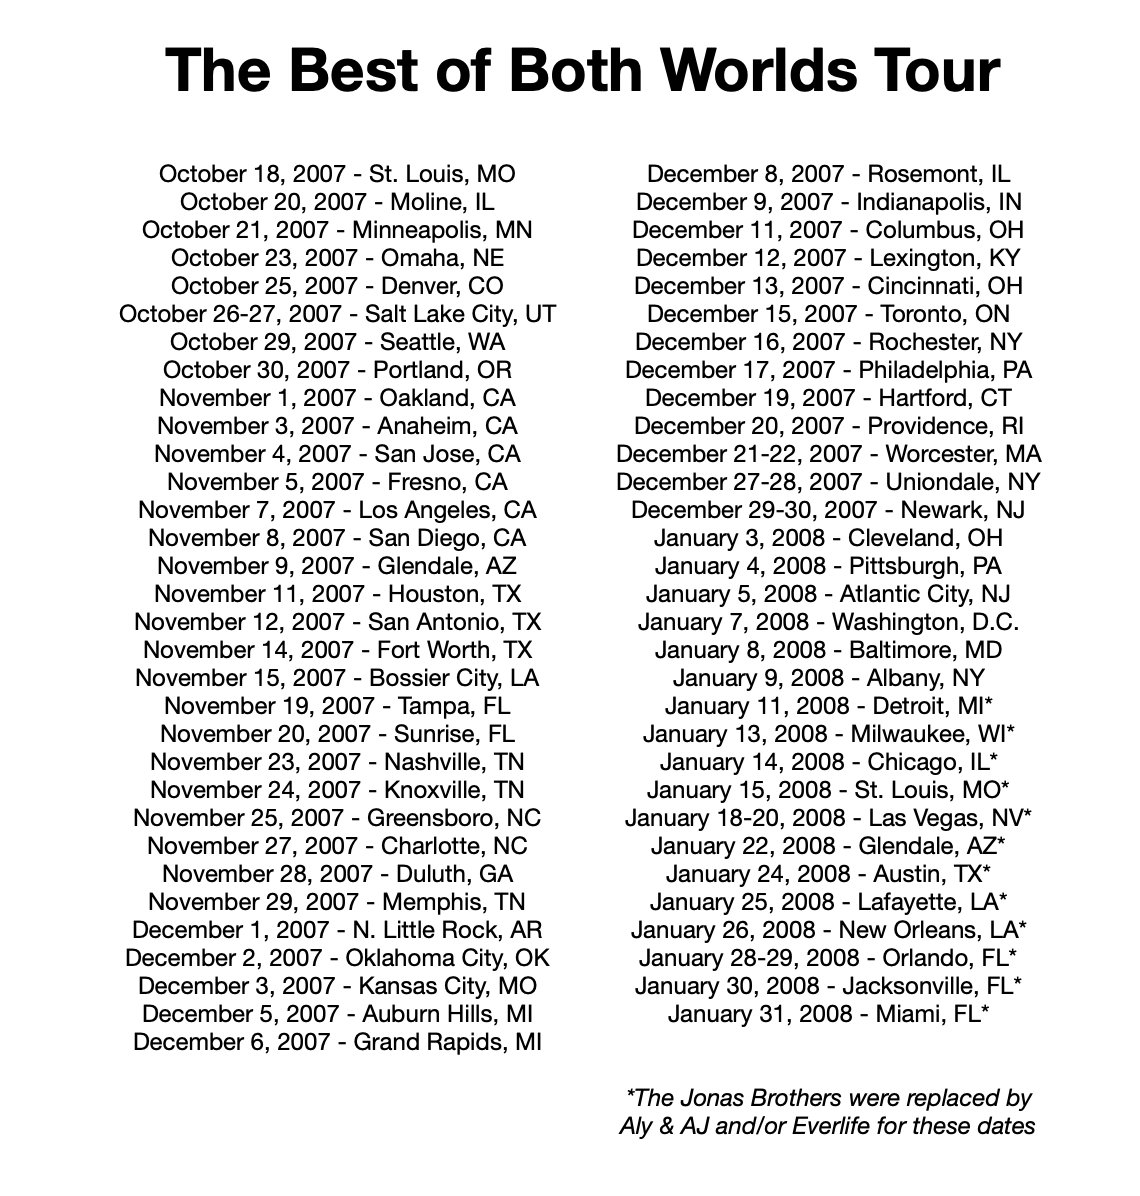 October 2007 - January 2008: Miley Cyrus and the Jonas Brothers toured North America together on the “Best of Both Worlds Tour” - highlights below!